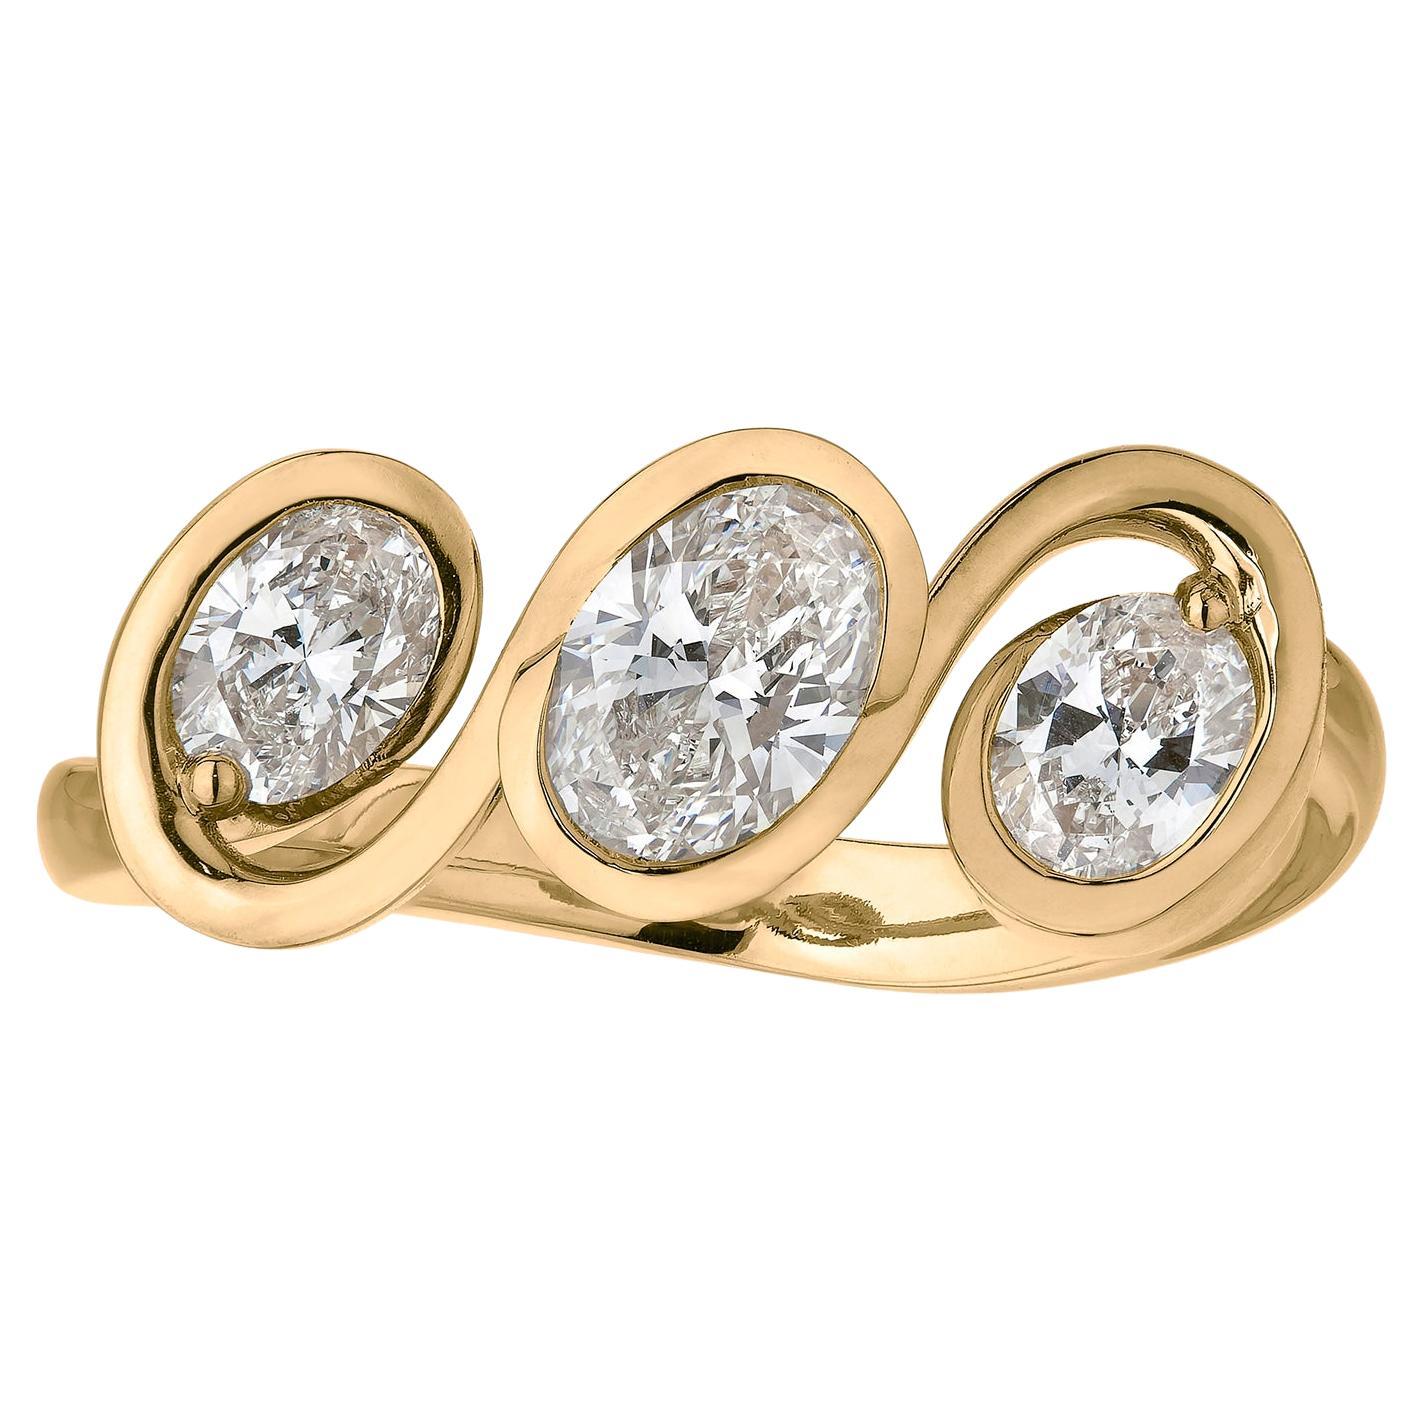 For Sale:  Handcrafted Diamond Three Stone Ring, 18k Yellow Gold